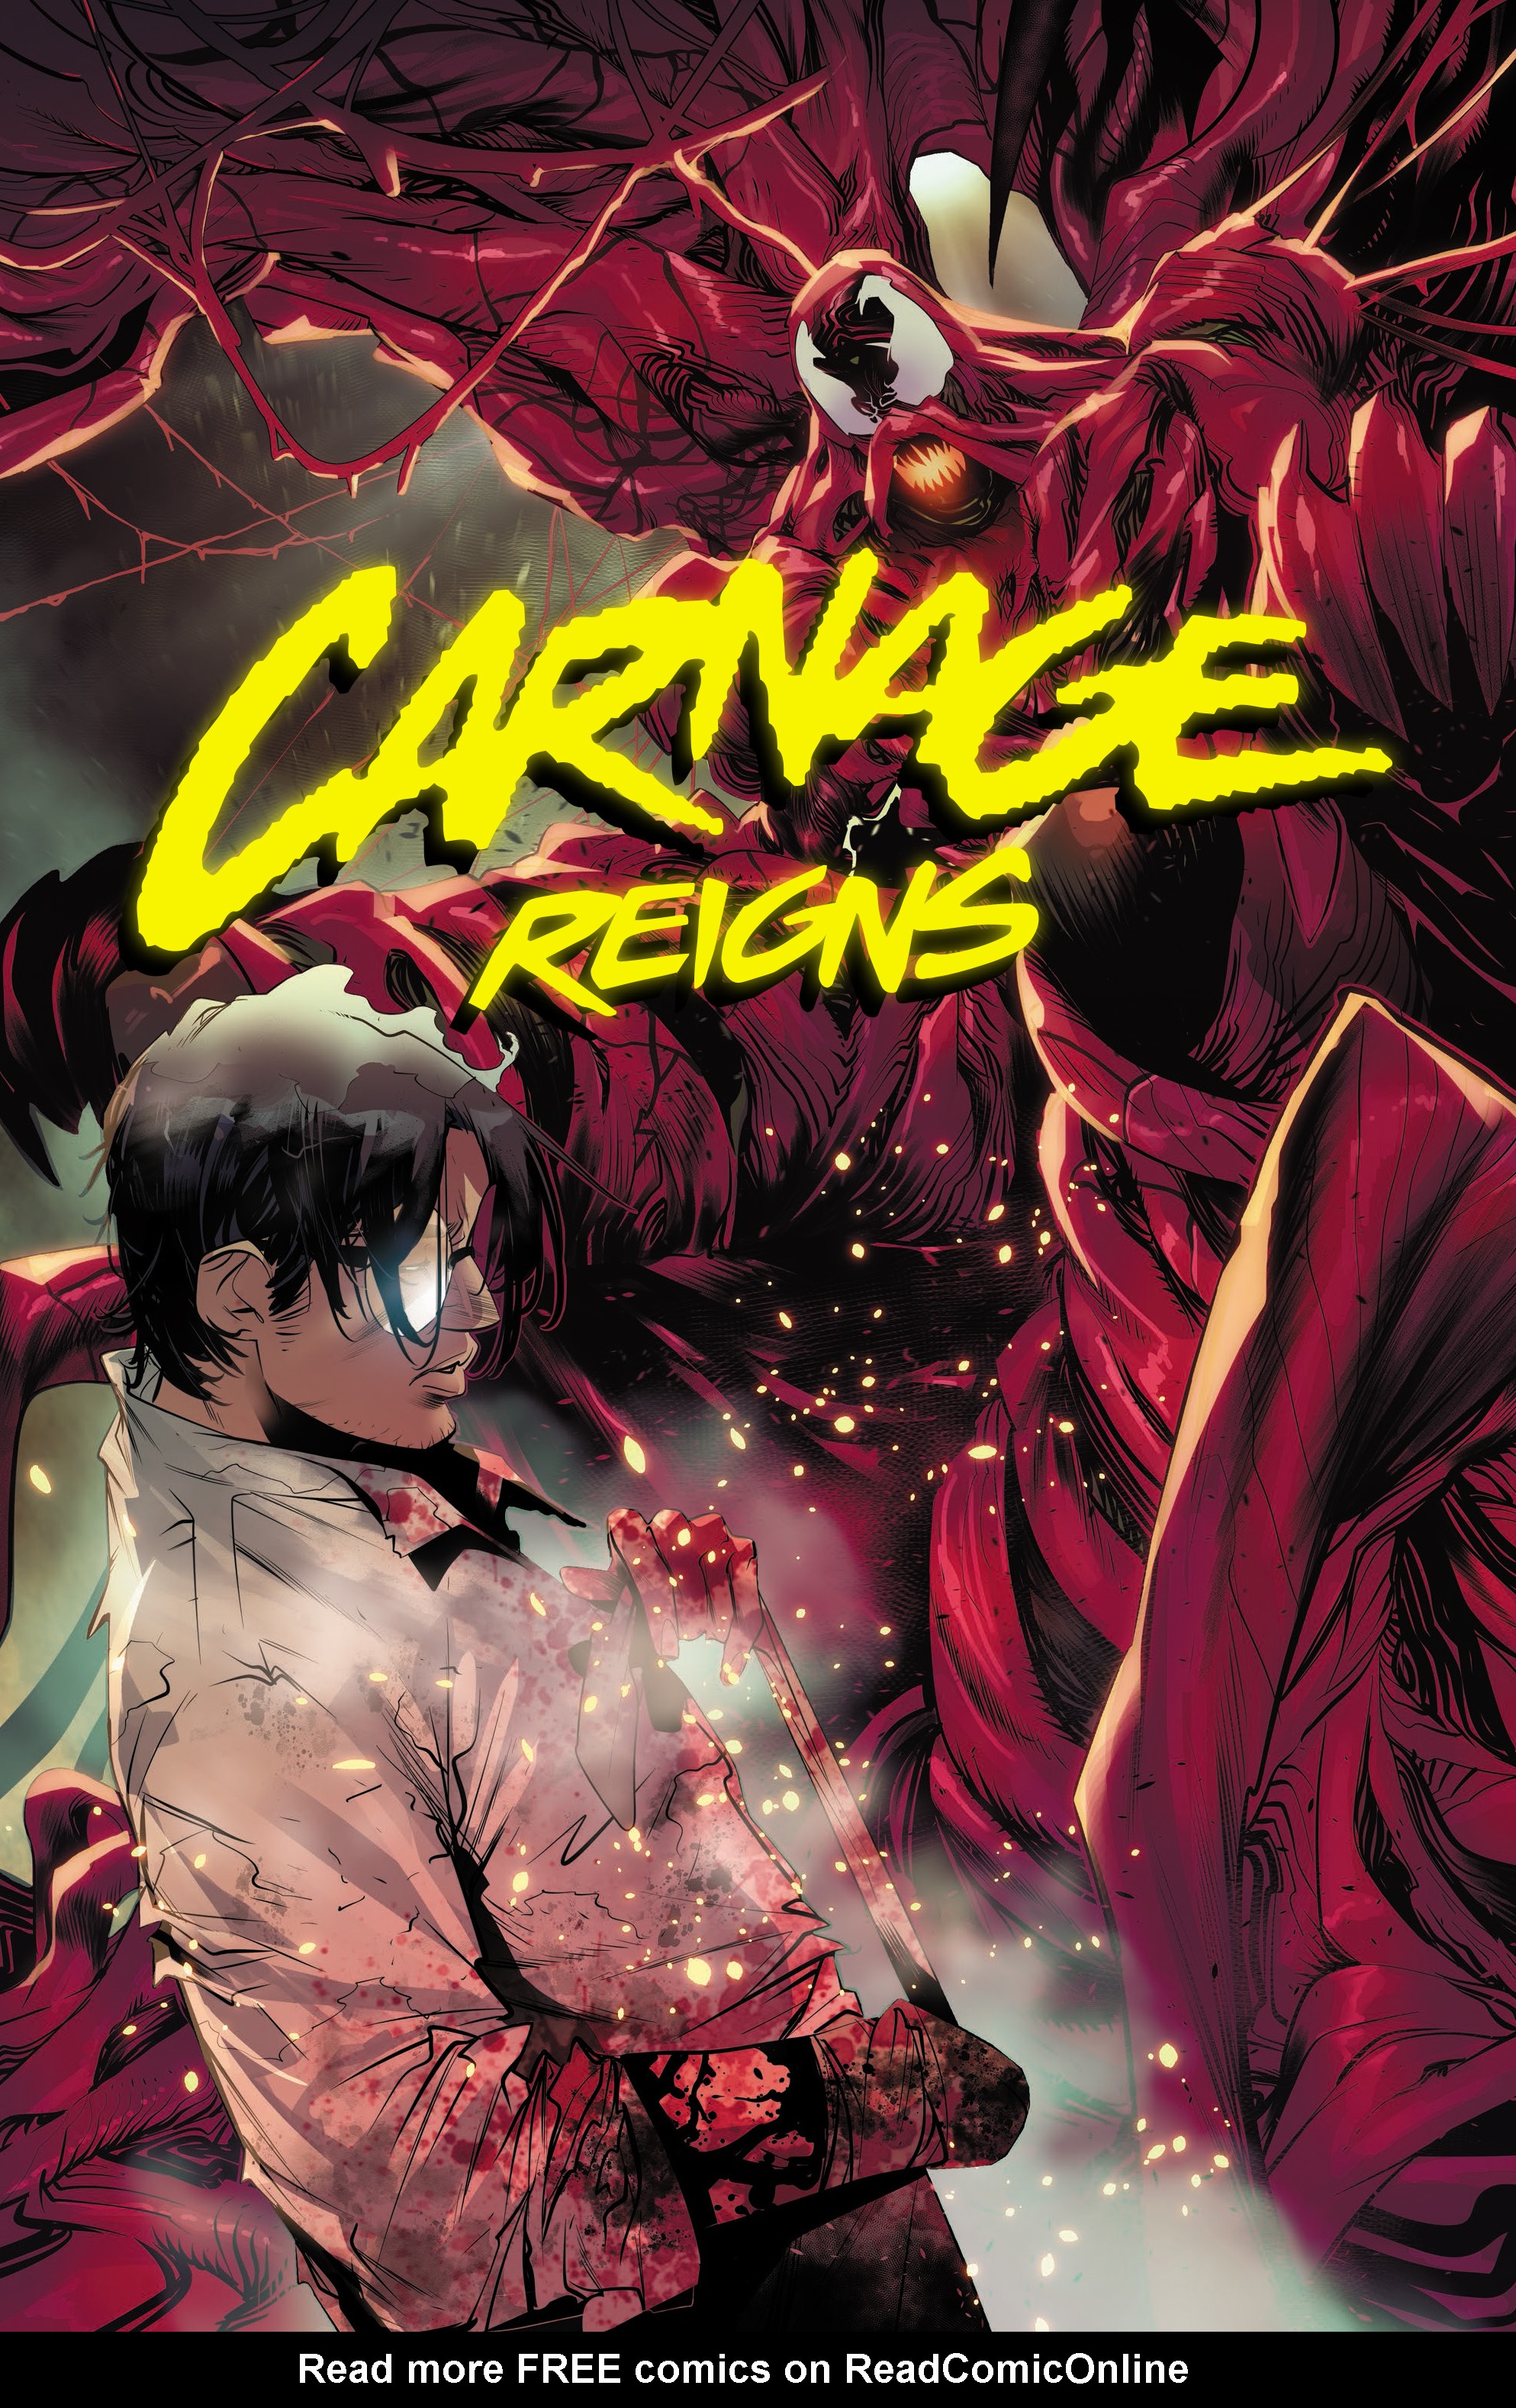 Read online Carnage Reigns comic -  Issue # TPB (Part 1) - 2